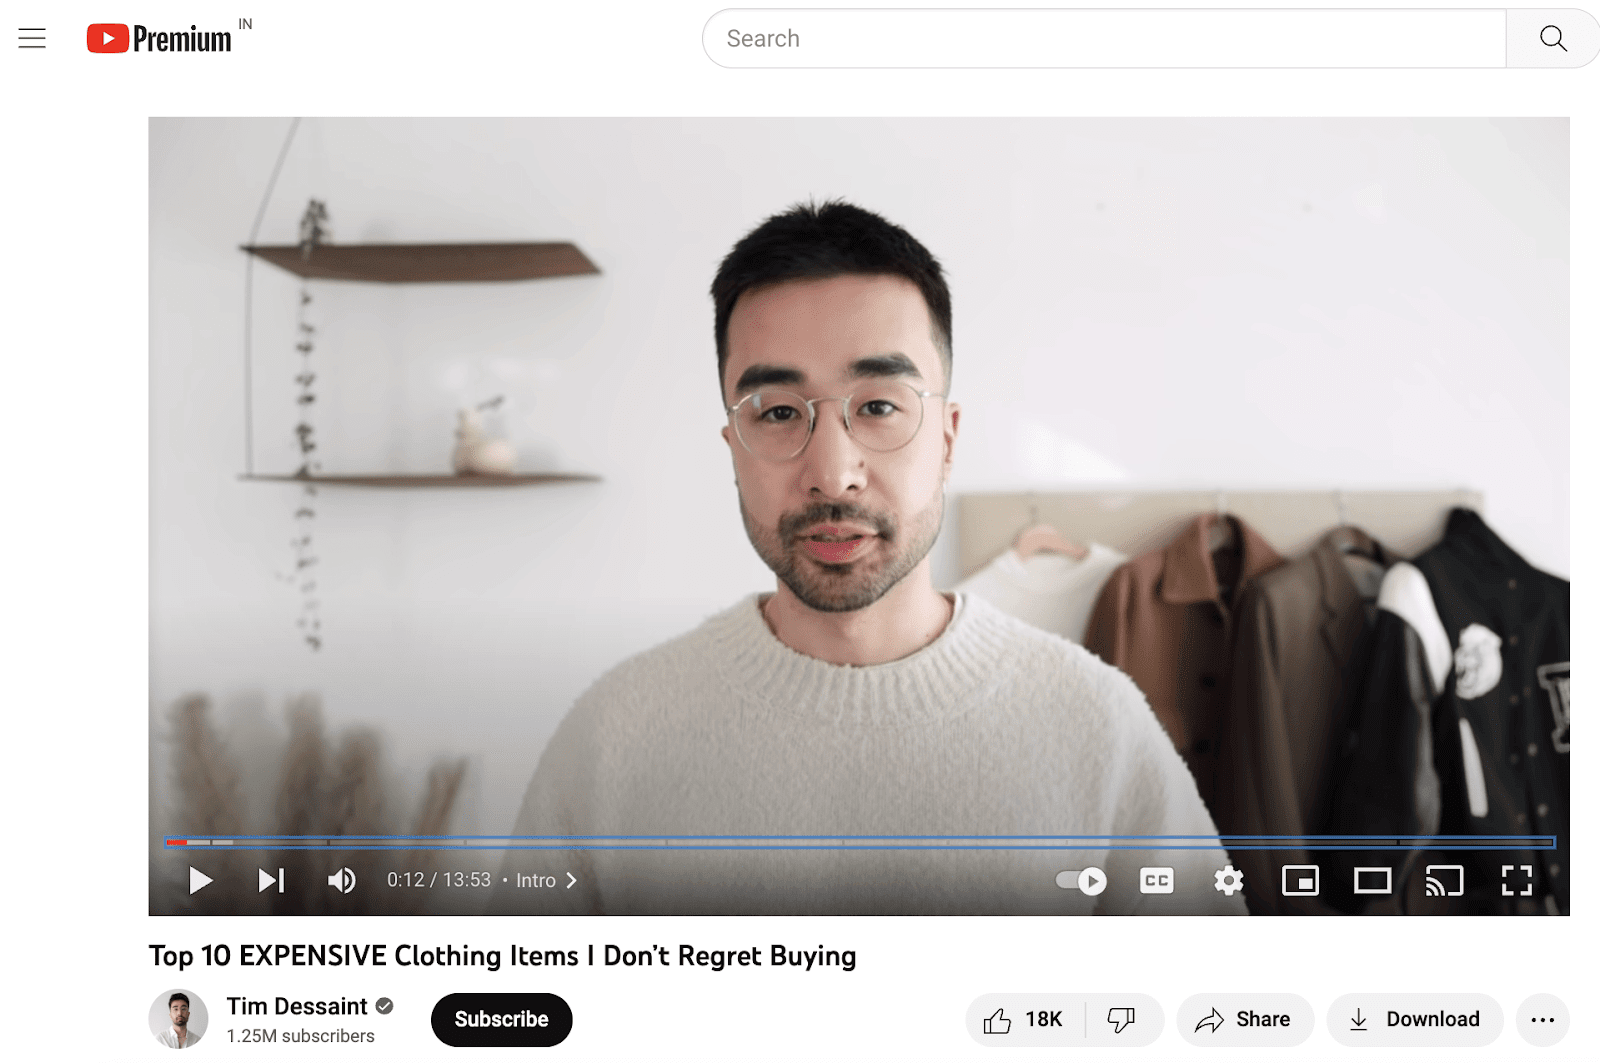 Tim Dessaint's YouTube video on 10 expensive clothing items, sponsored by Farfetch